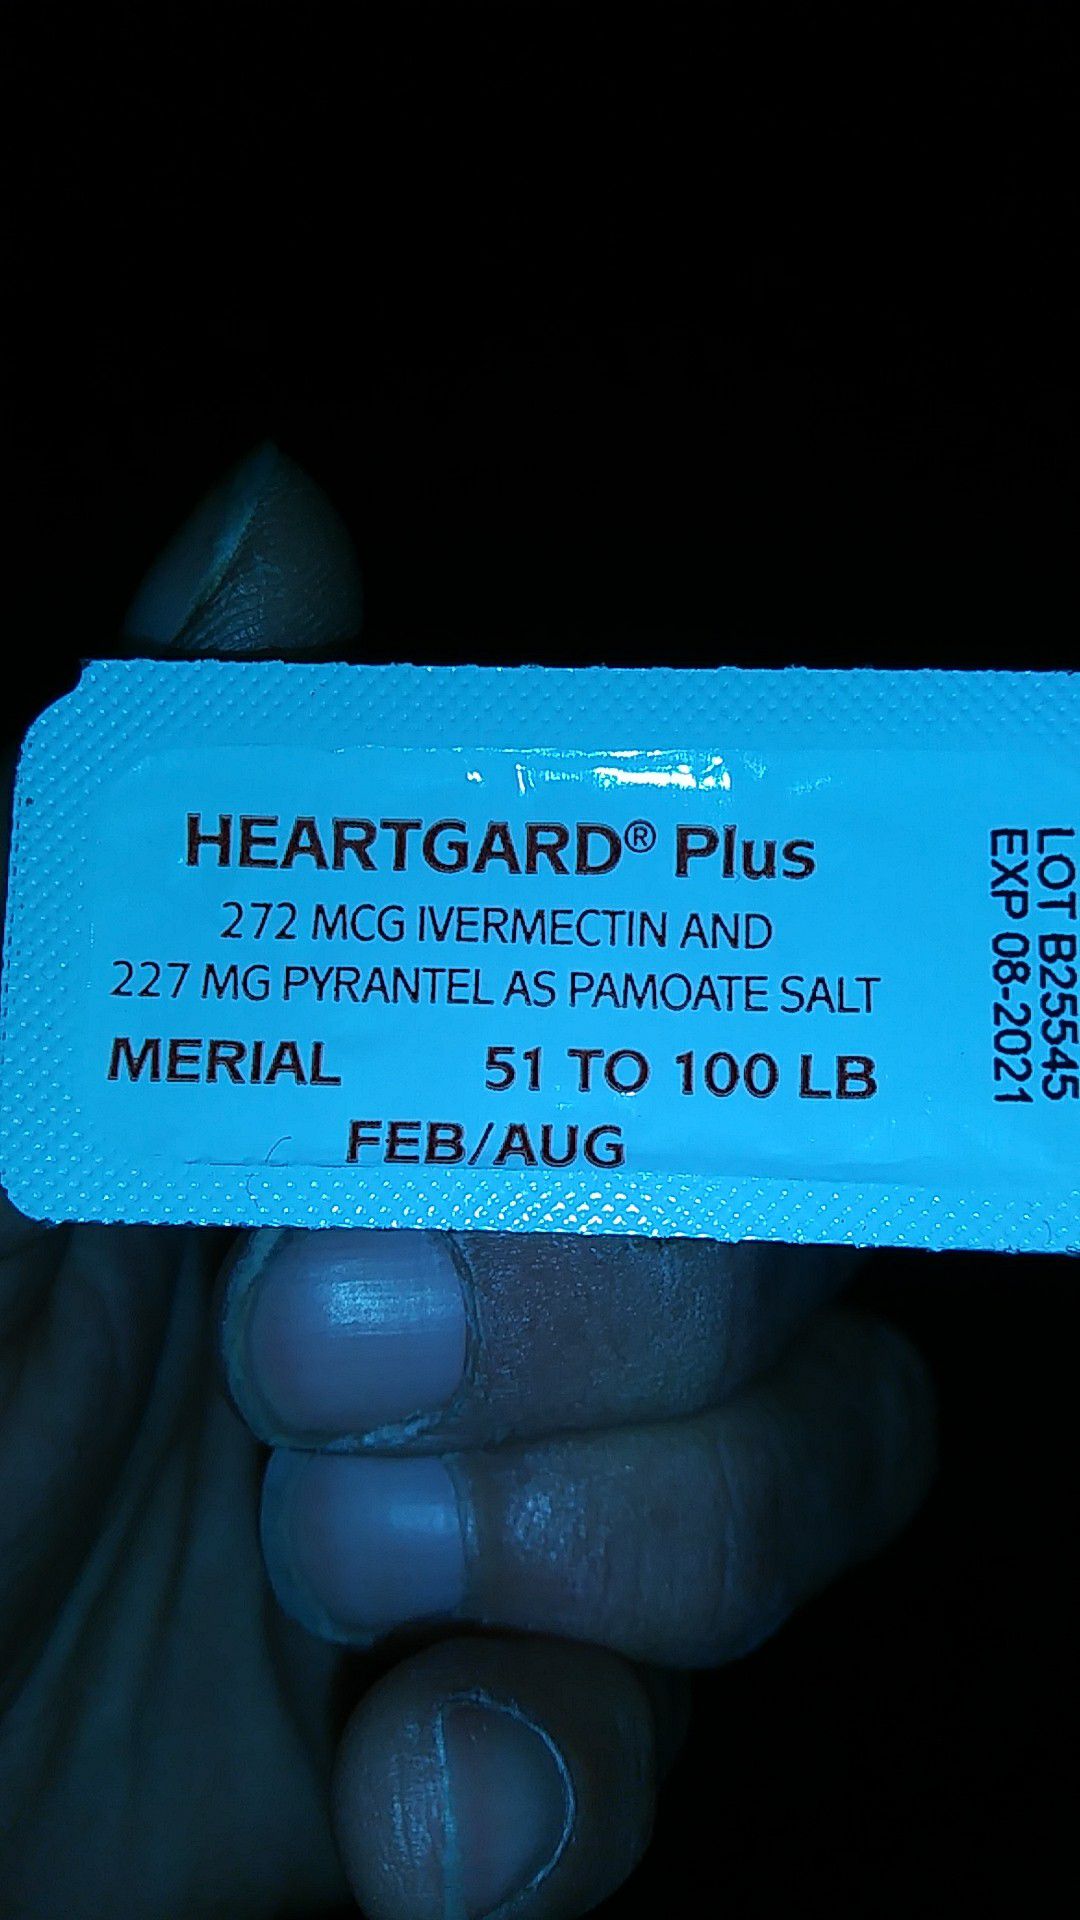 Heartguard heartworm med save yourself a vet bill and keep your fur baby healthy